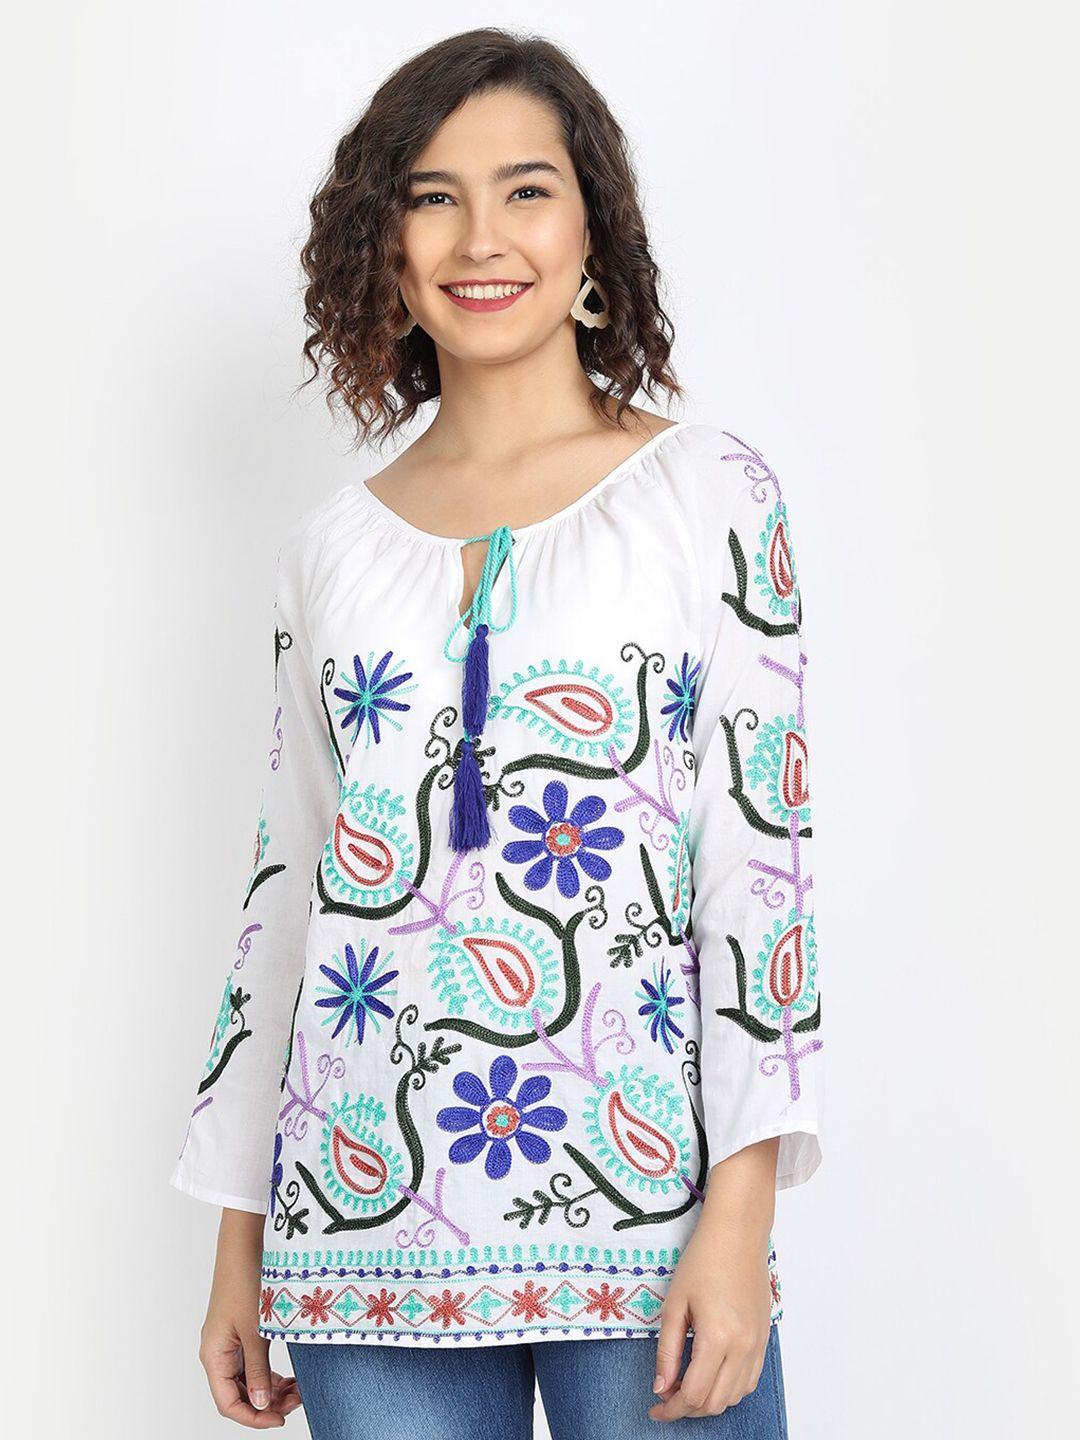 ix impression women white floral embroidered regular top